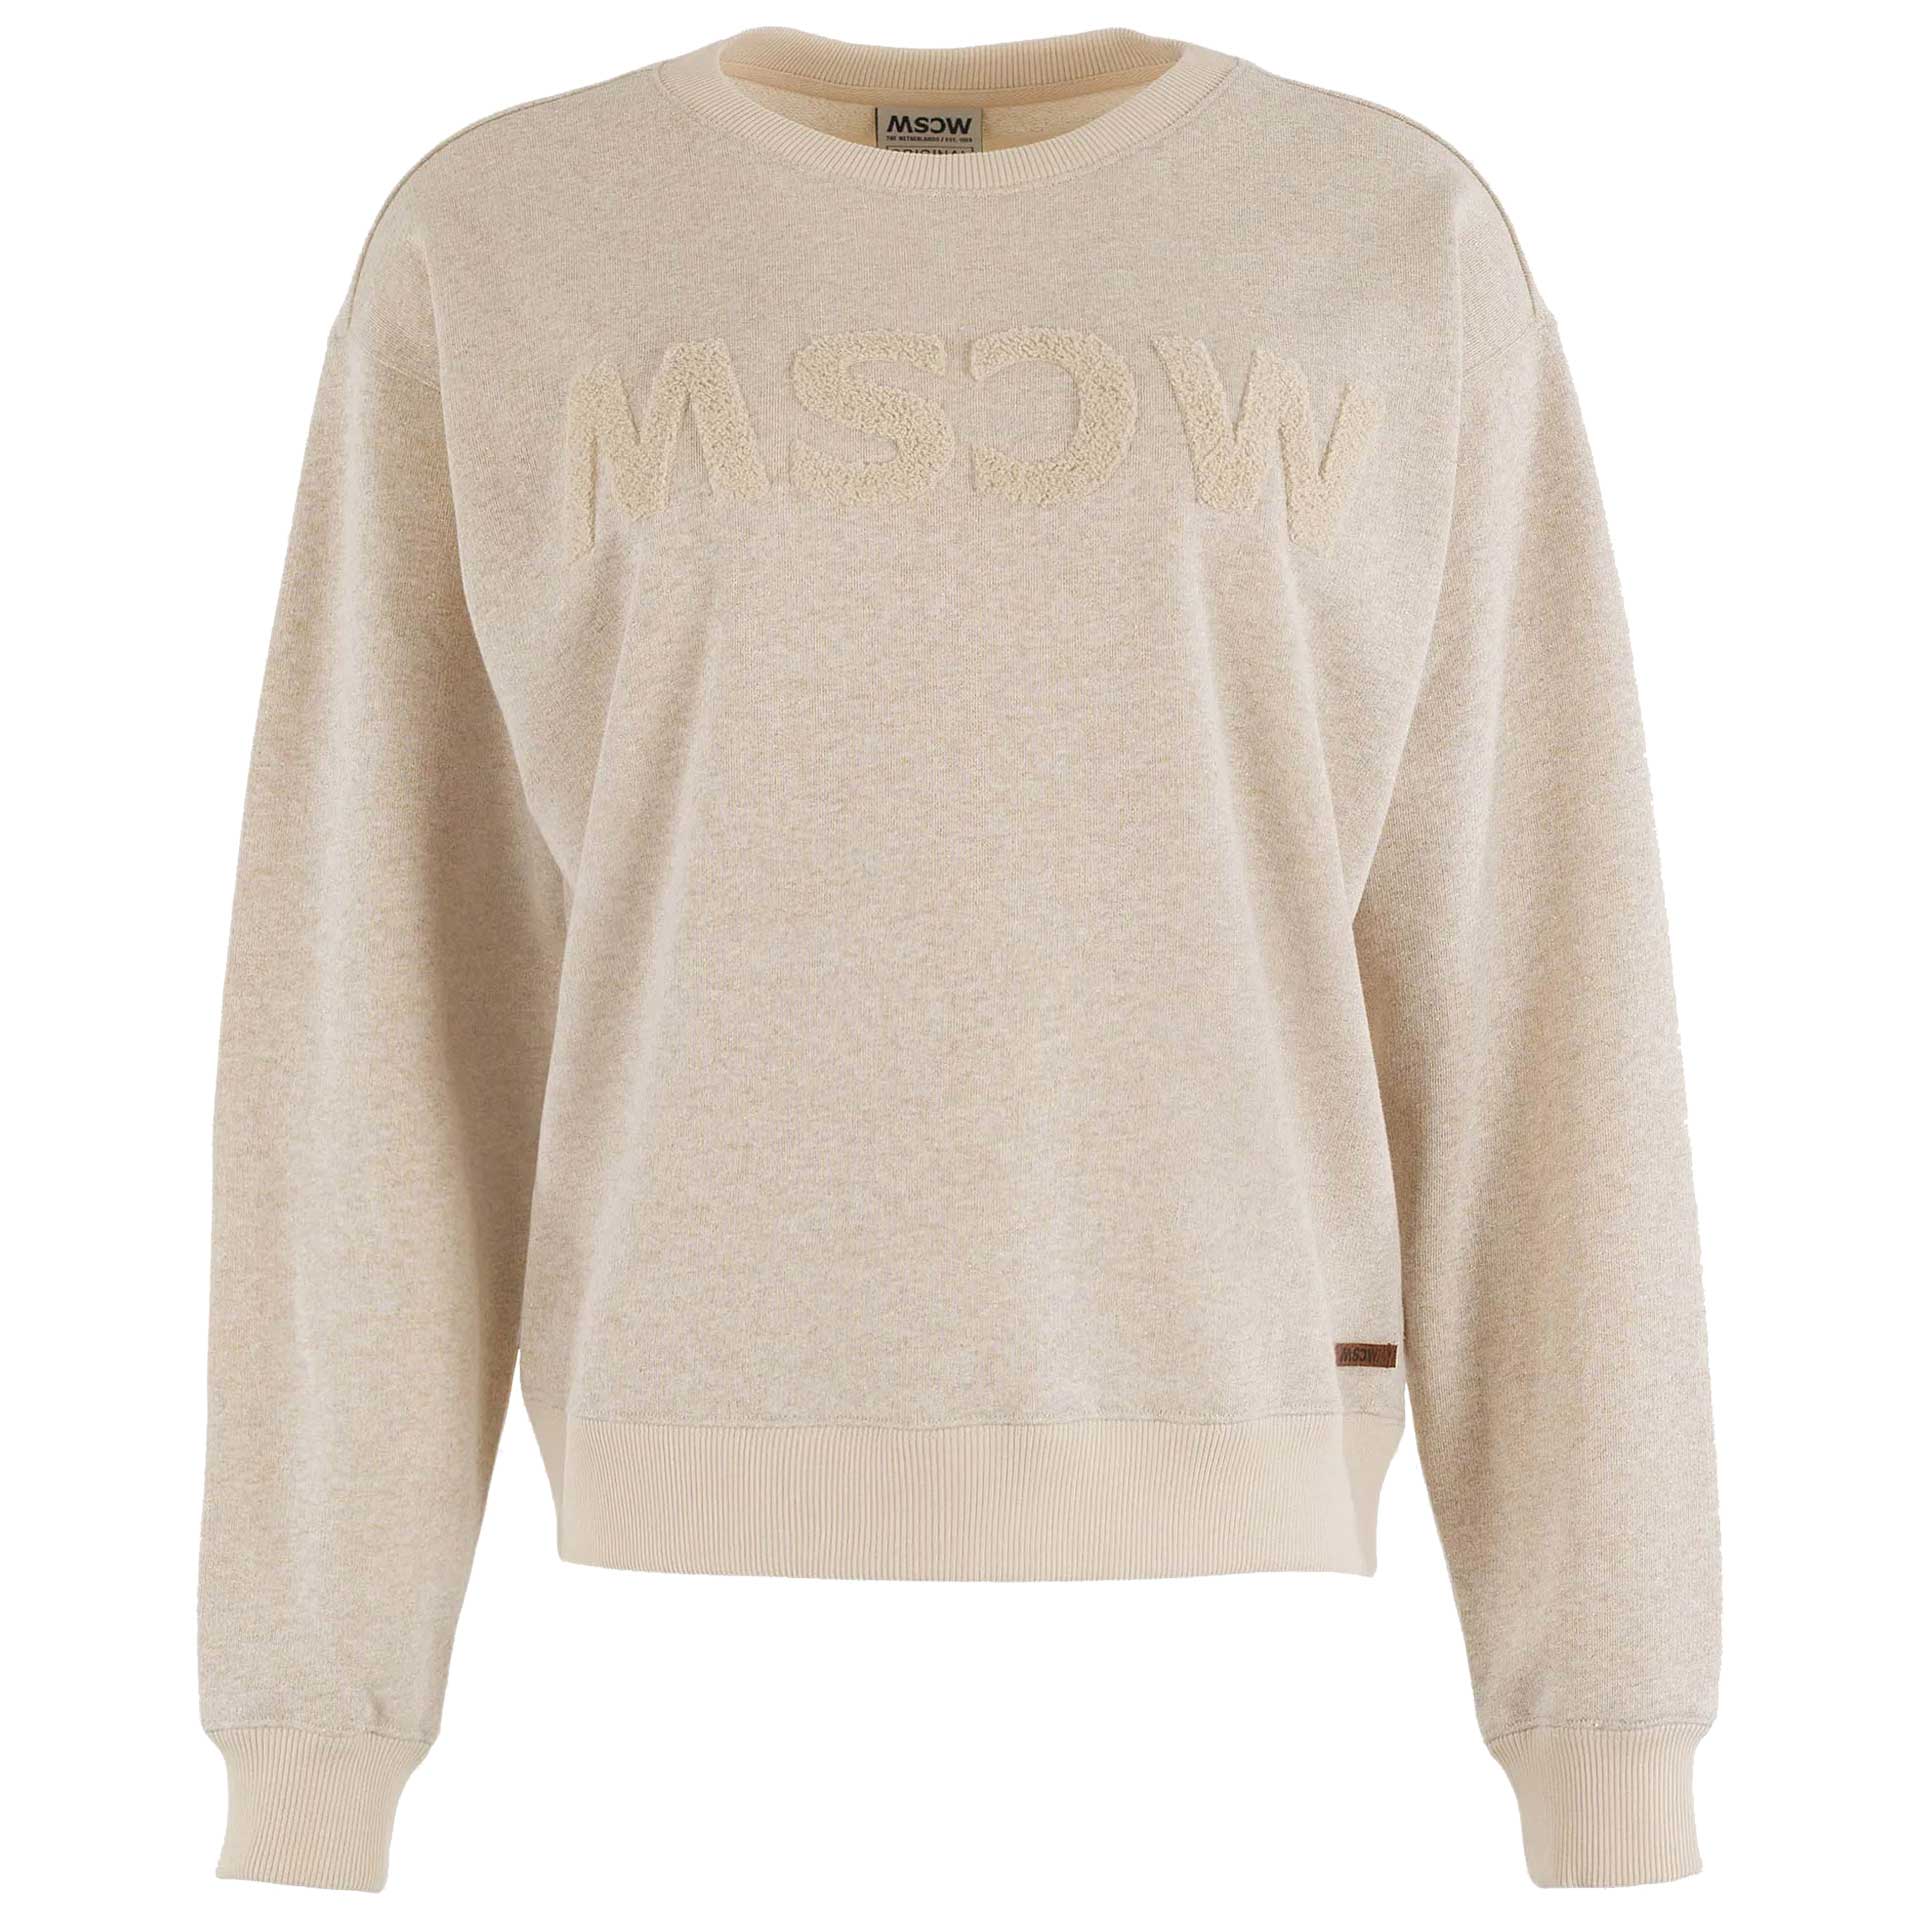 Moscow Sweater Logo 1